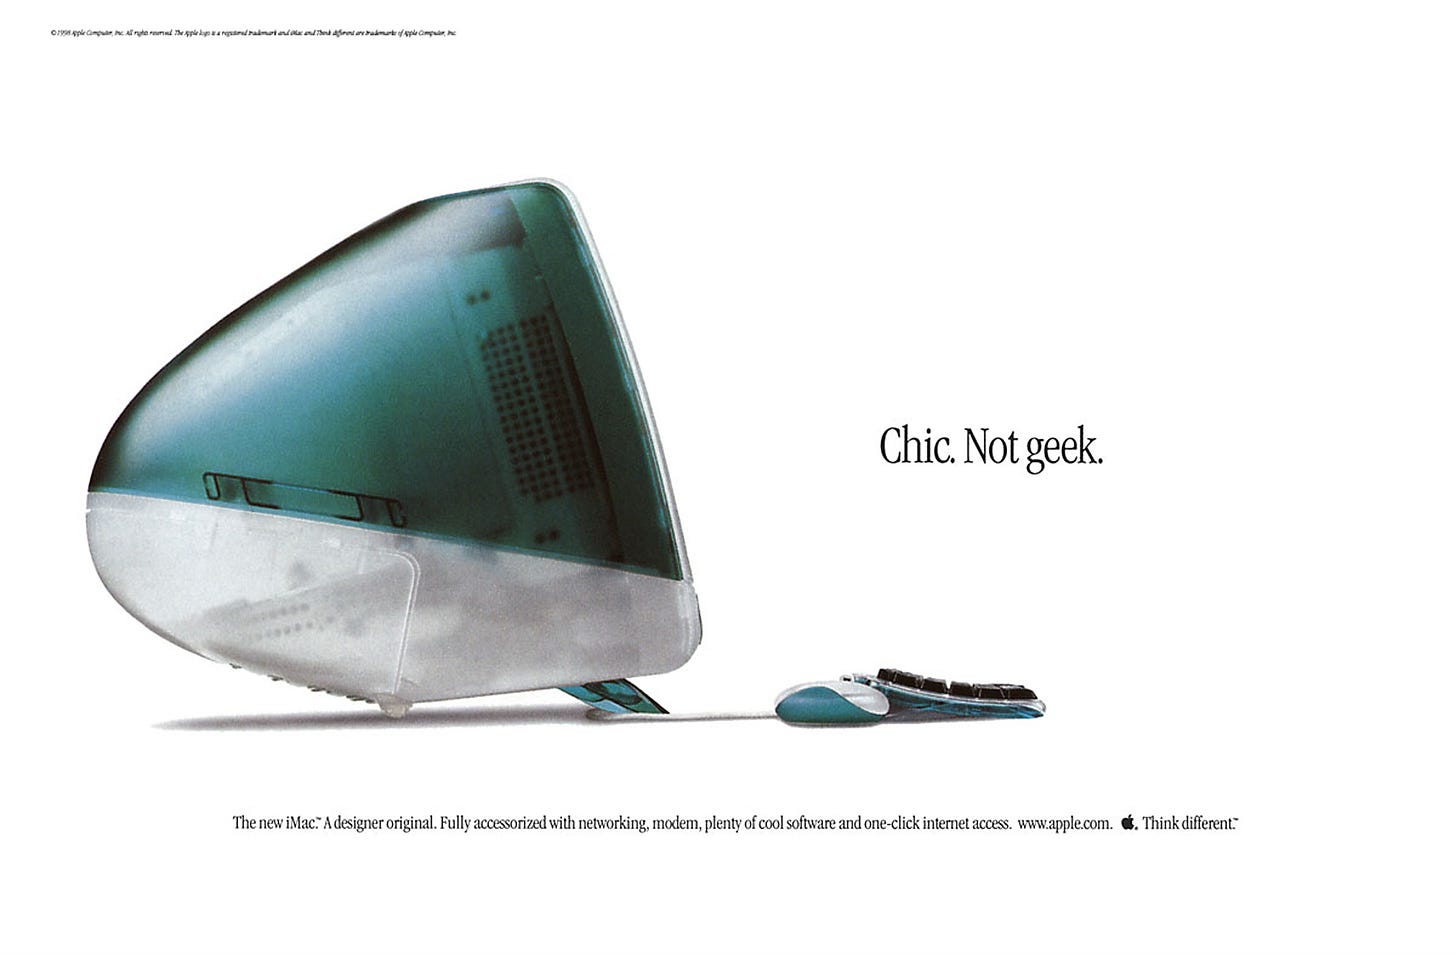 Today in Apple history: iMac G3 arrives to save Apple